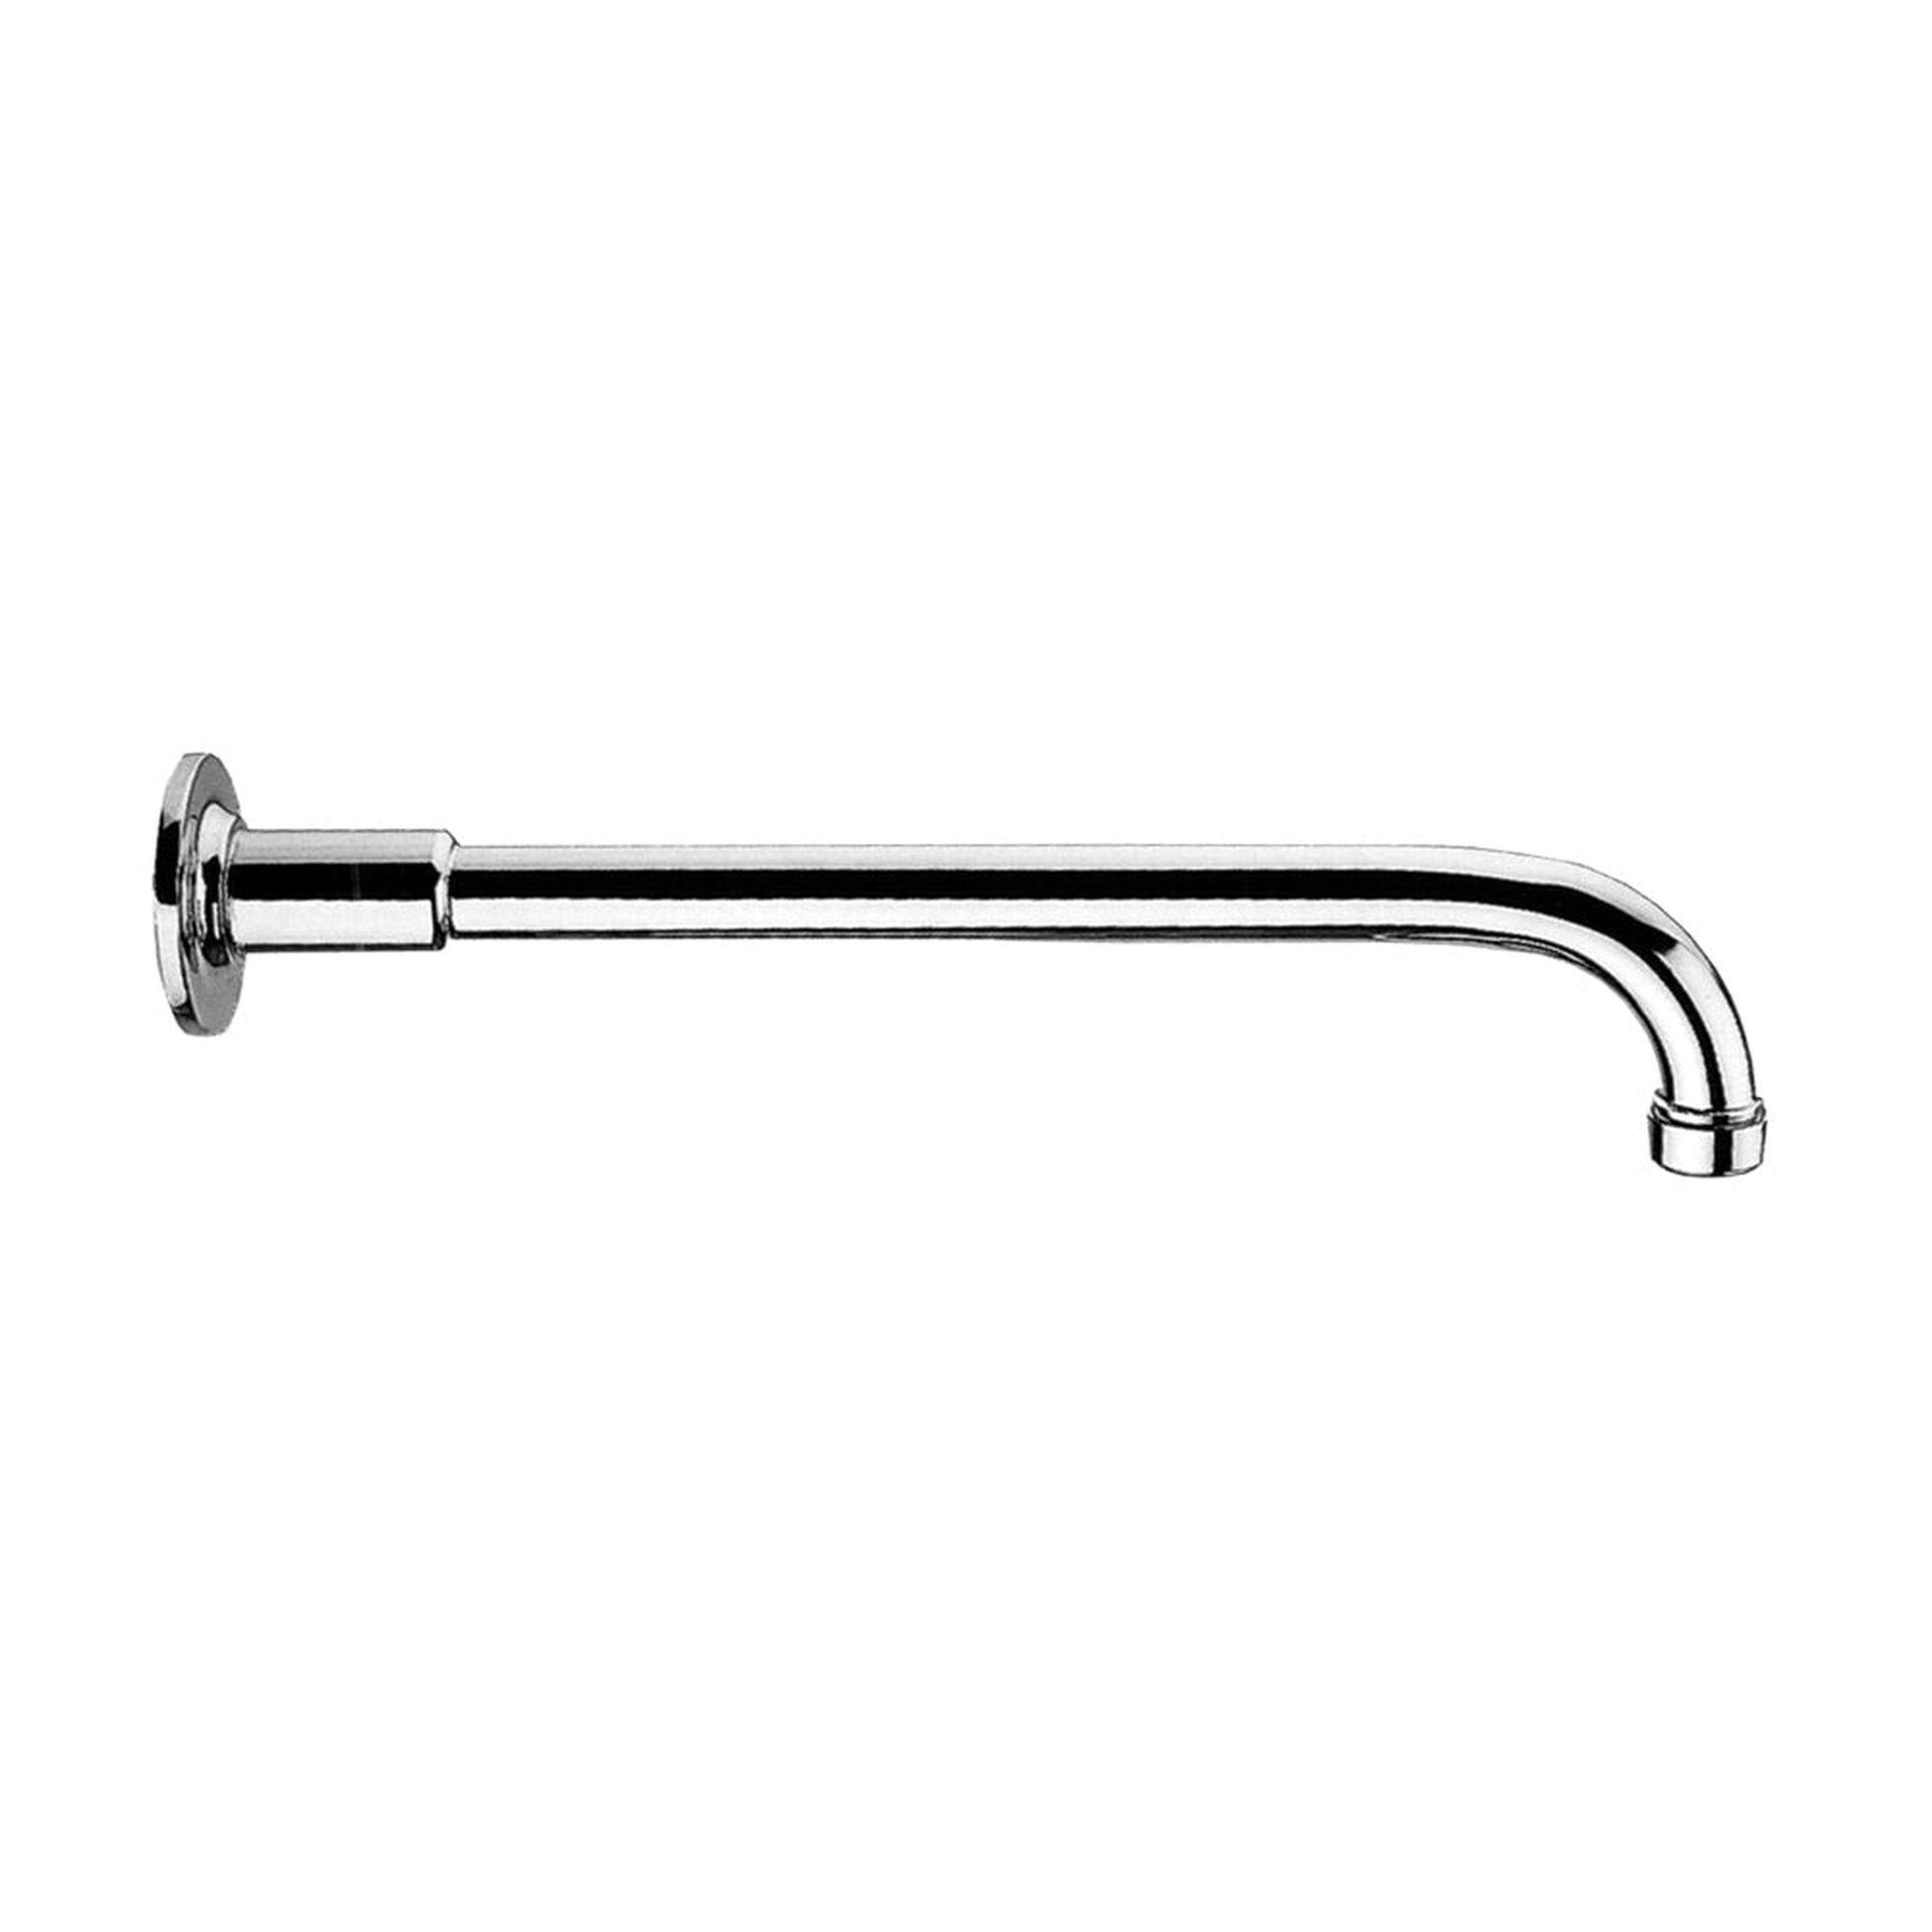 Whitehaus Showerhaus WHSA350-1-C Polished Chrome Solid Brass One-Piece Shower Arm With Decorative Faux Sleeve